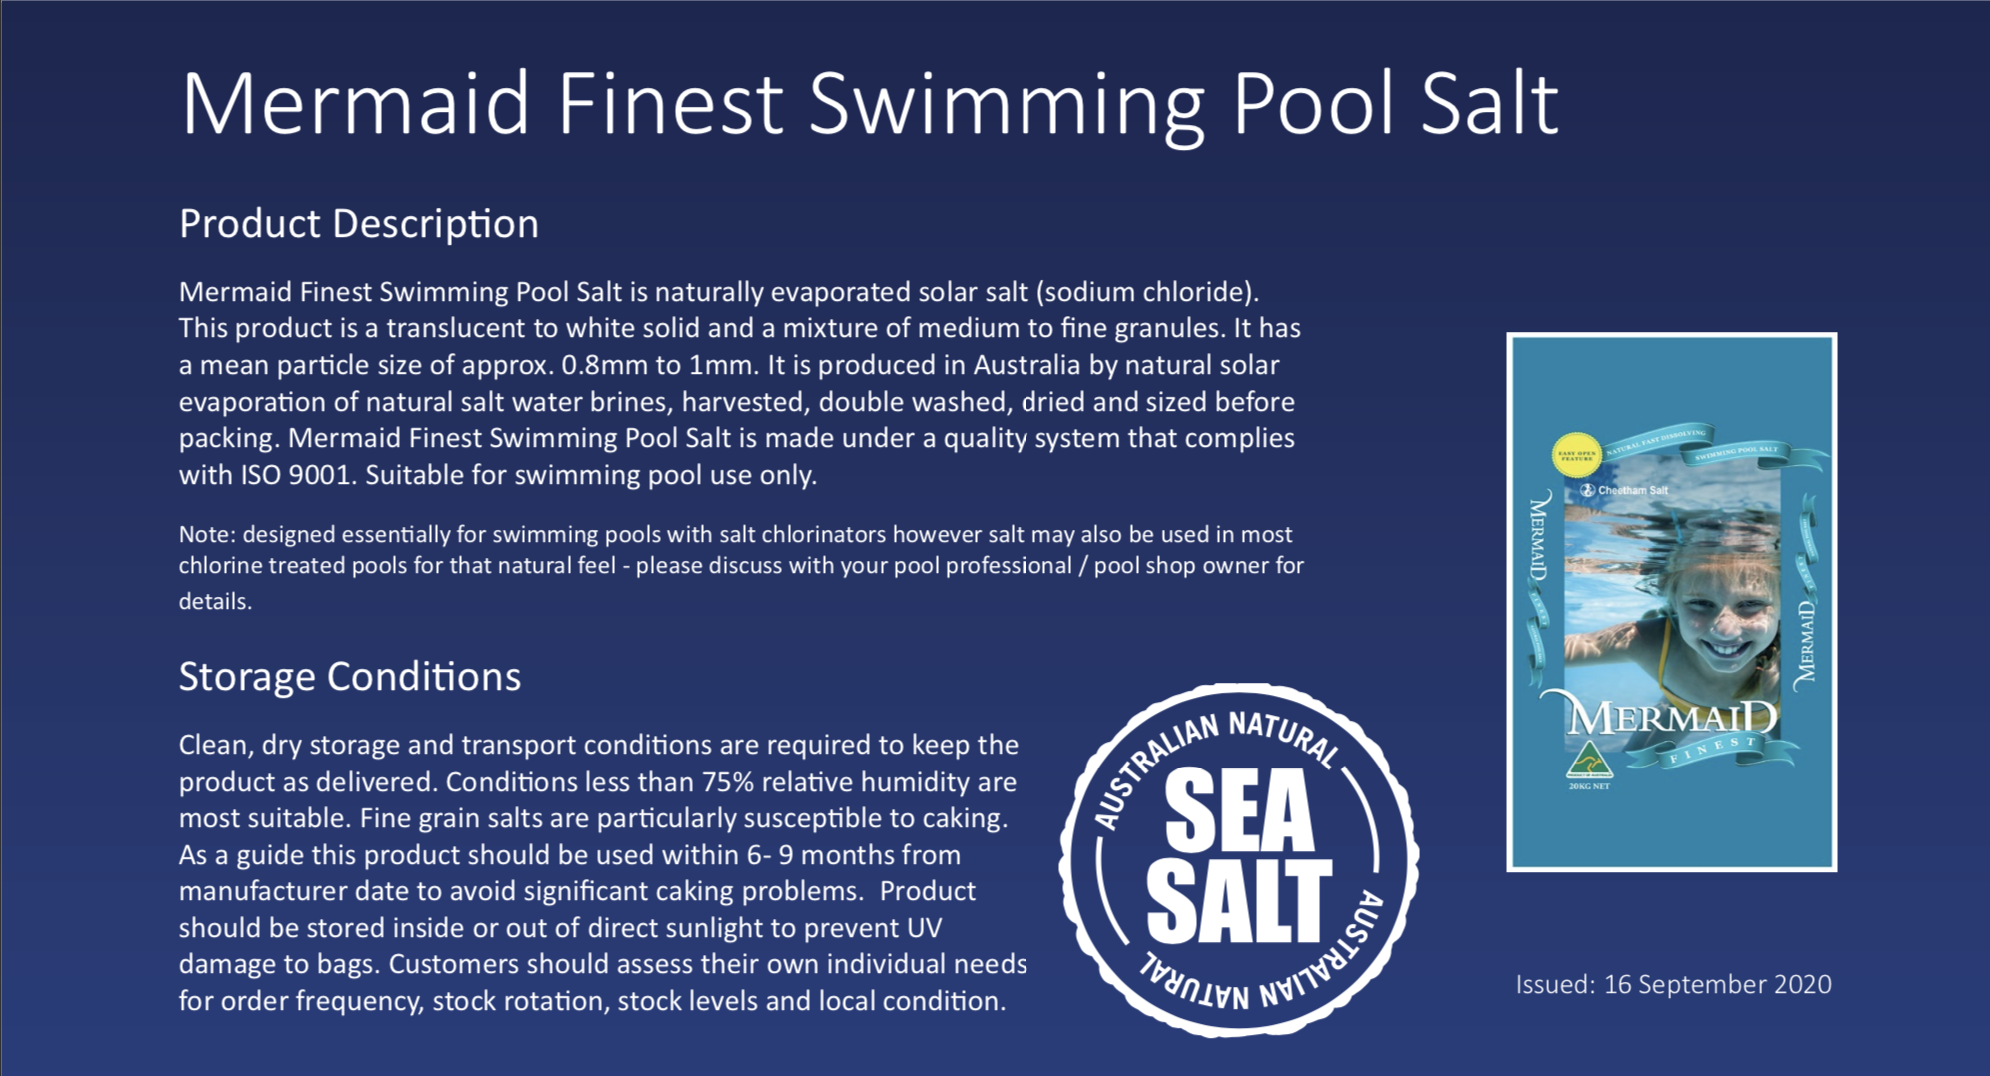 Mermaid Finest Swimming Pool Salt product description that includes an image of the product and a seal reading 